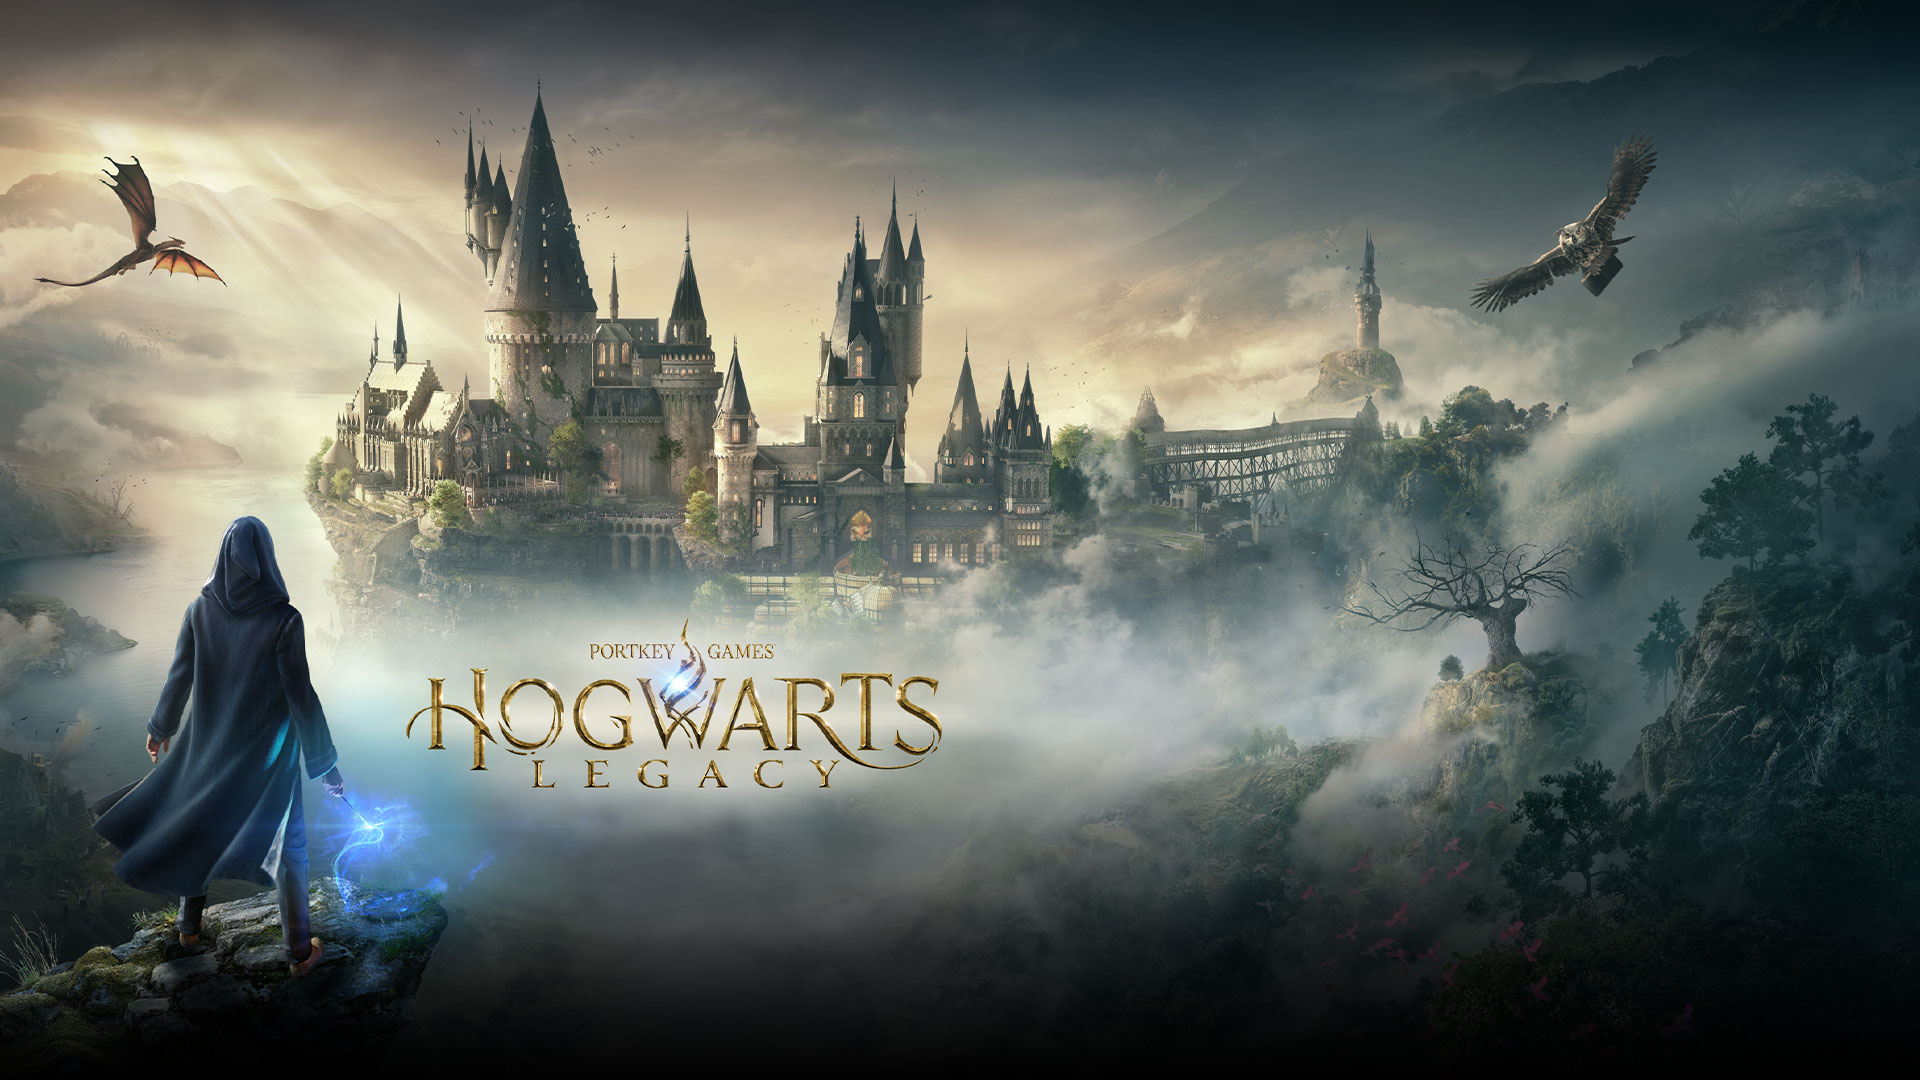 Hogwarts Legacy: Is It Going To Be Worth the Wait?